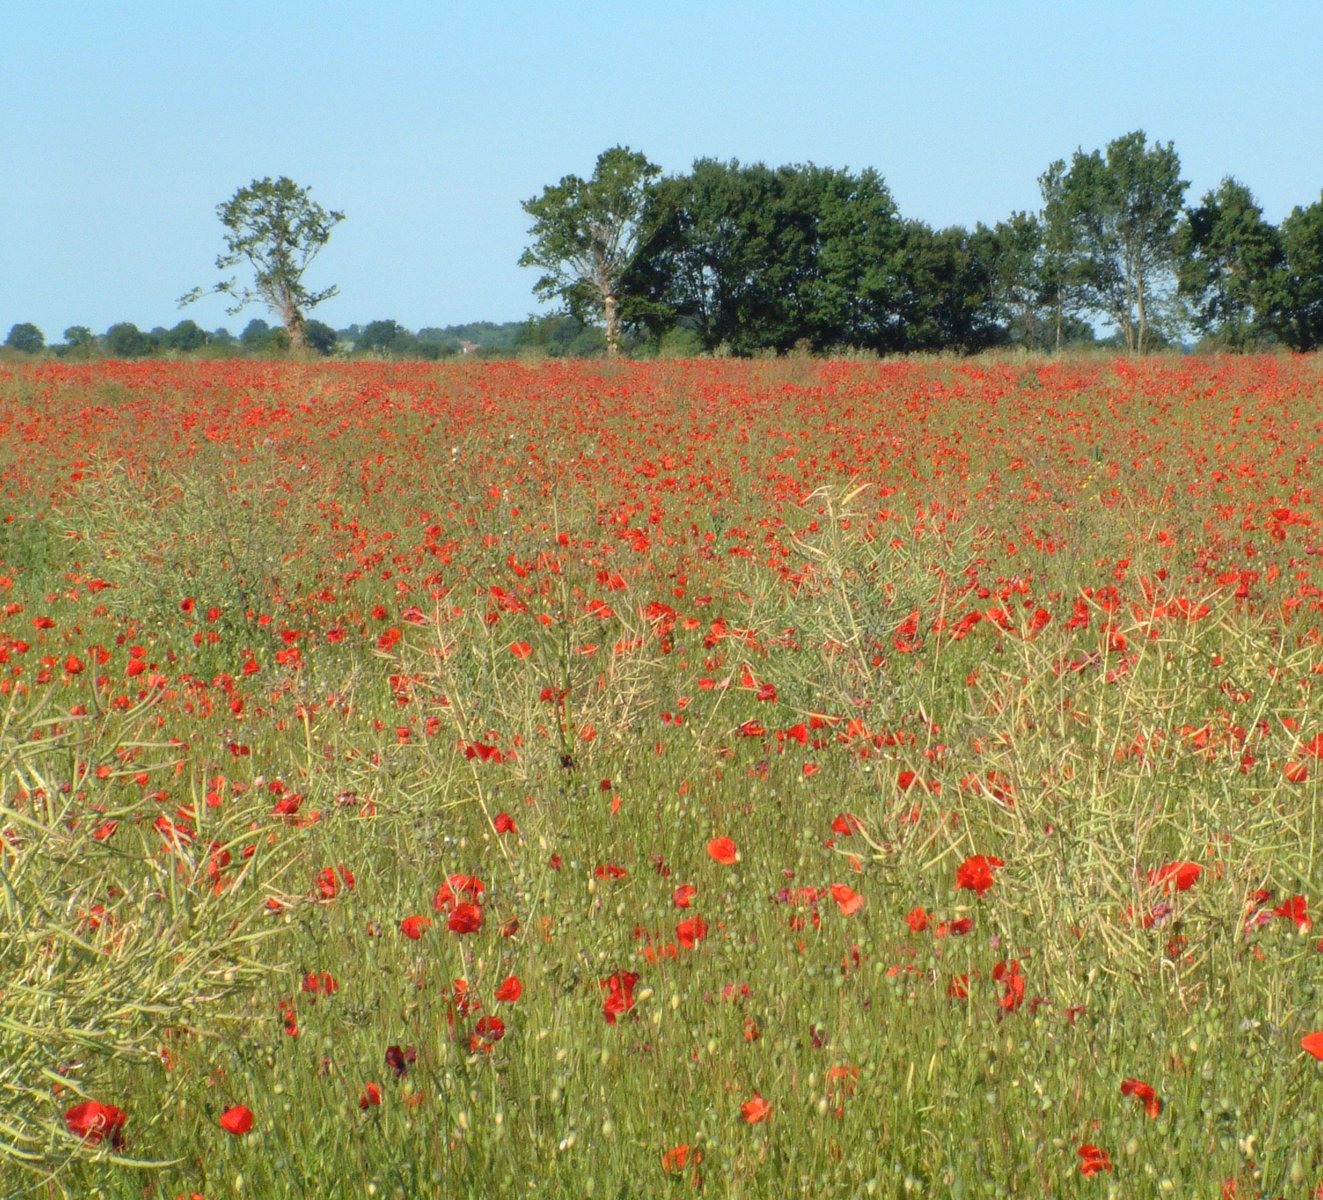 a field full of red flowers and trees